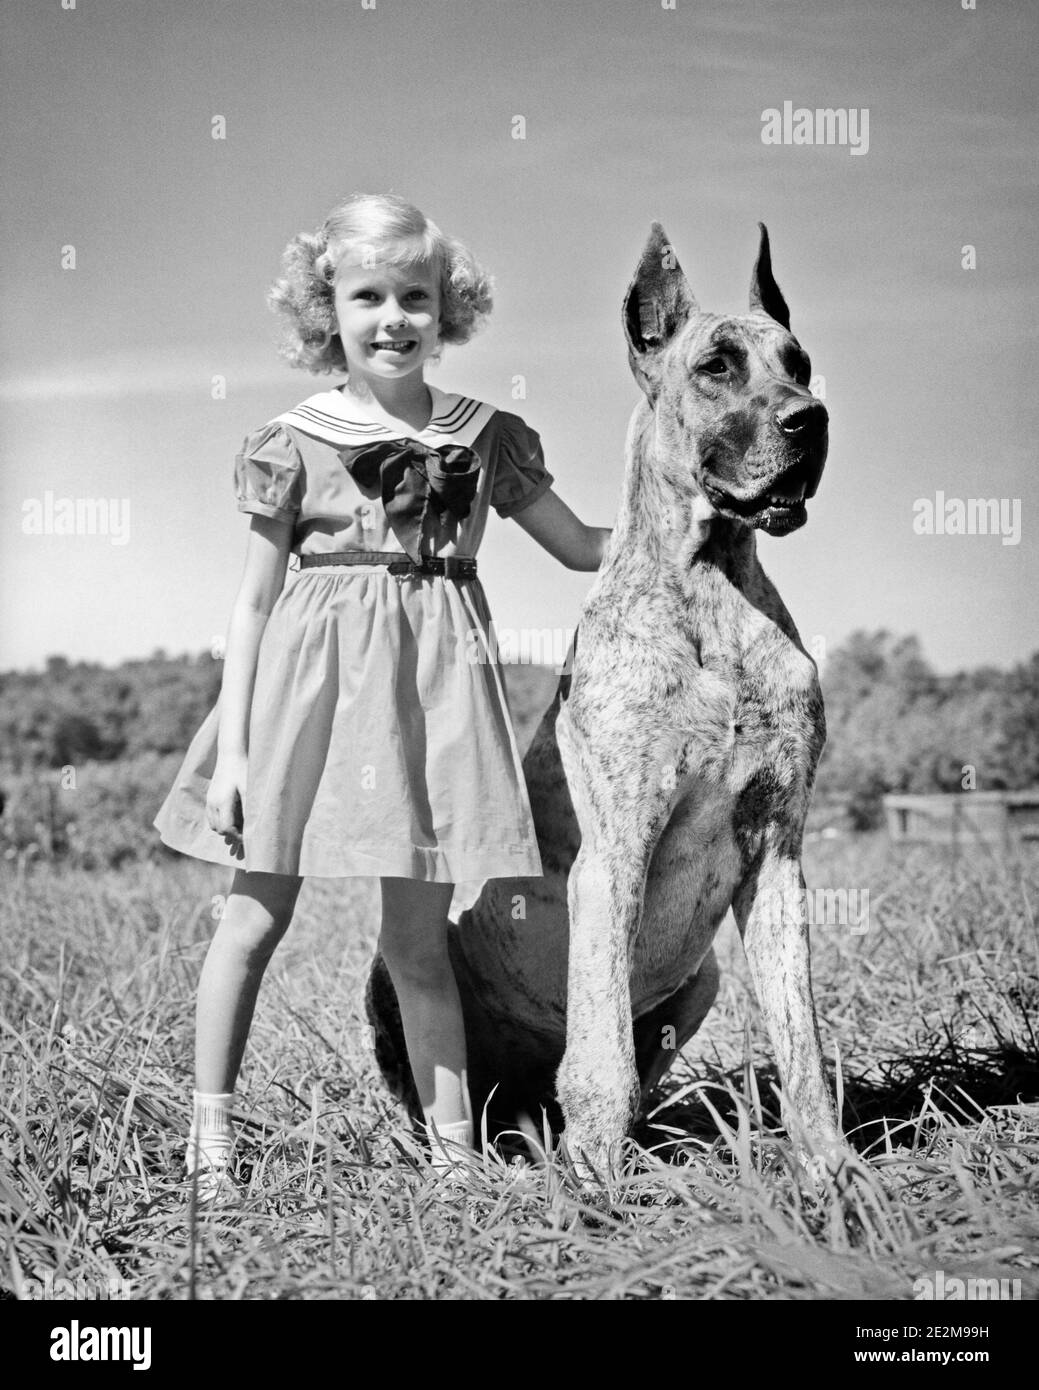 1950s SMALL BLONDE GIRL WEARING A DRESS STANDING WITH LARGE BRINDLE COAT GREAT DANE DOG HER HAND RESTING ON HIS BACK - d4223 HAR001 HARS BEST GREAT JOY LIFESTYLE FEMALES COPY SPACE FRIENDSHIP FULL-LENGTH PETS CONFIDENCE DANE B&W RESTING SIZE HAPPINESS MAMMALS HIS PROTECTION CANINES DIFFERENCE POOCH CONNECTION BREED COMPANION FRIENDLY GENTLE GIANT BRINDLE CANINE COOPERATION GROWTH HUGE JUVENILES MAMMAL TOGETHERNESS BIG AND LITTLE BLACK AND WHITE CAUCASIAN ETHNICITY GENTLE GREAT DANE HAR001 LARGE AND SMALL OLD FASHIONED Stock Photo